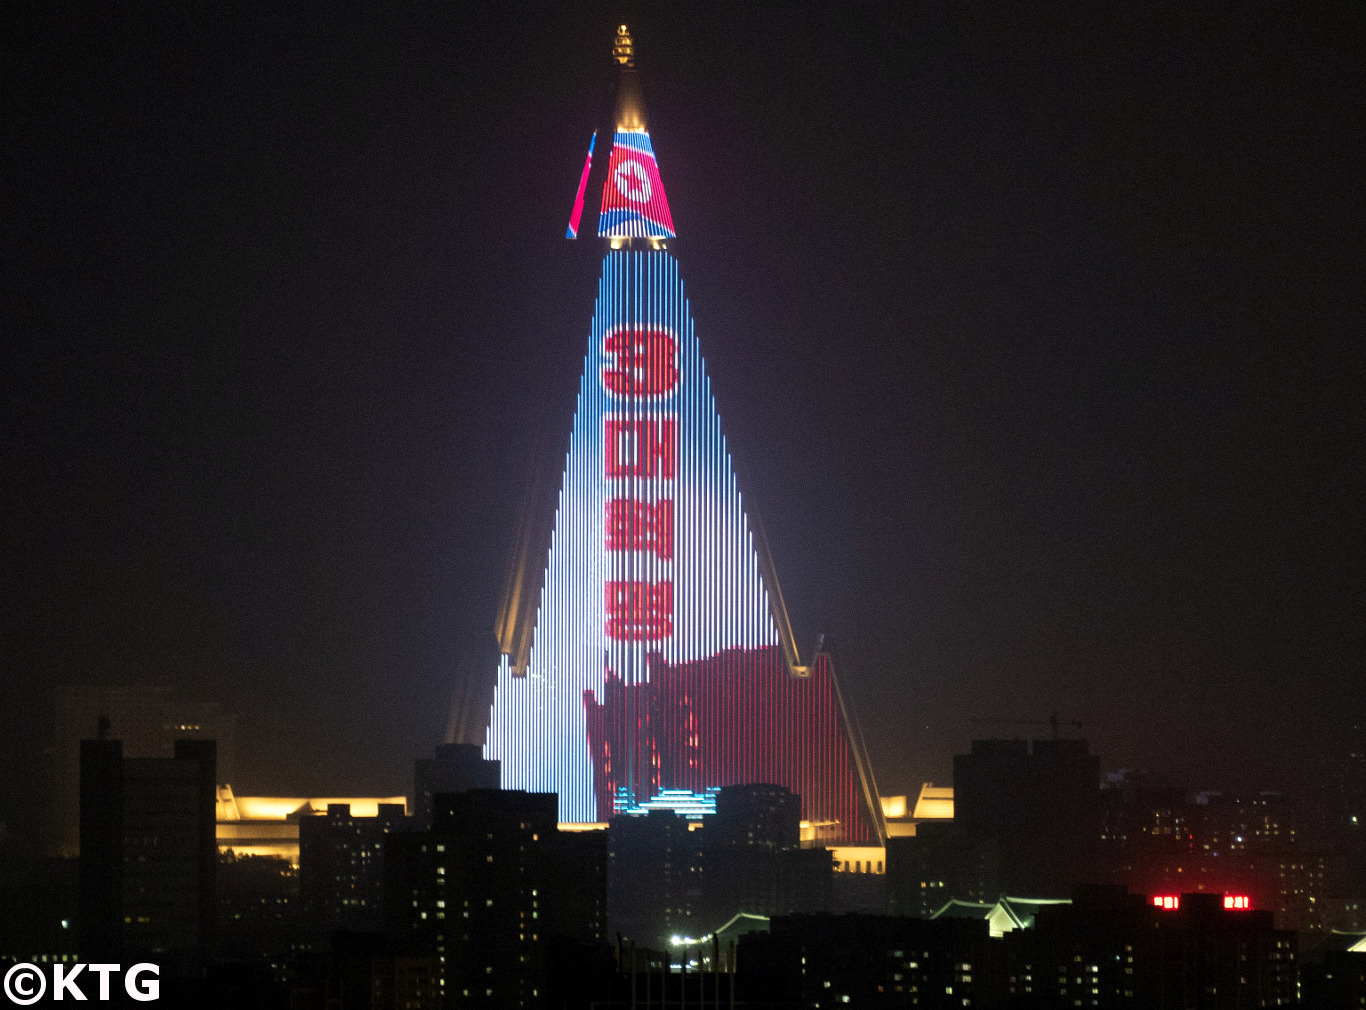 The Ryugyong in Pyongyang, North Korea (DPRK), seen at night. Trip arranged by KTG Tours